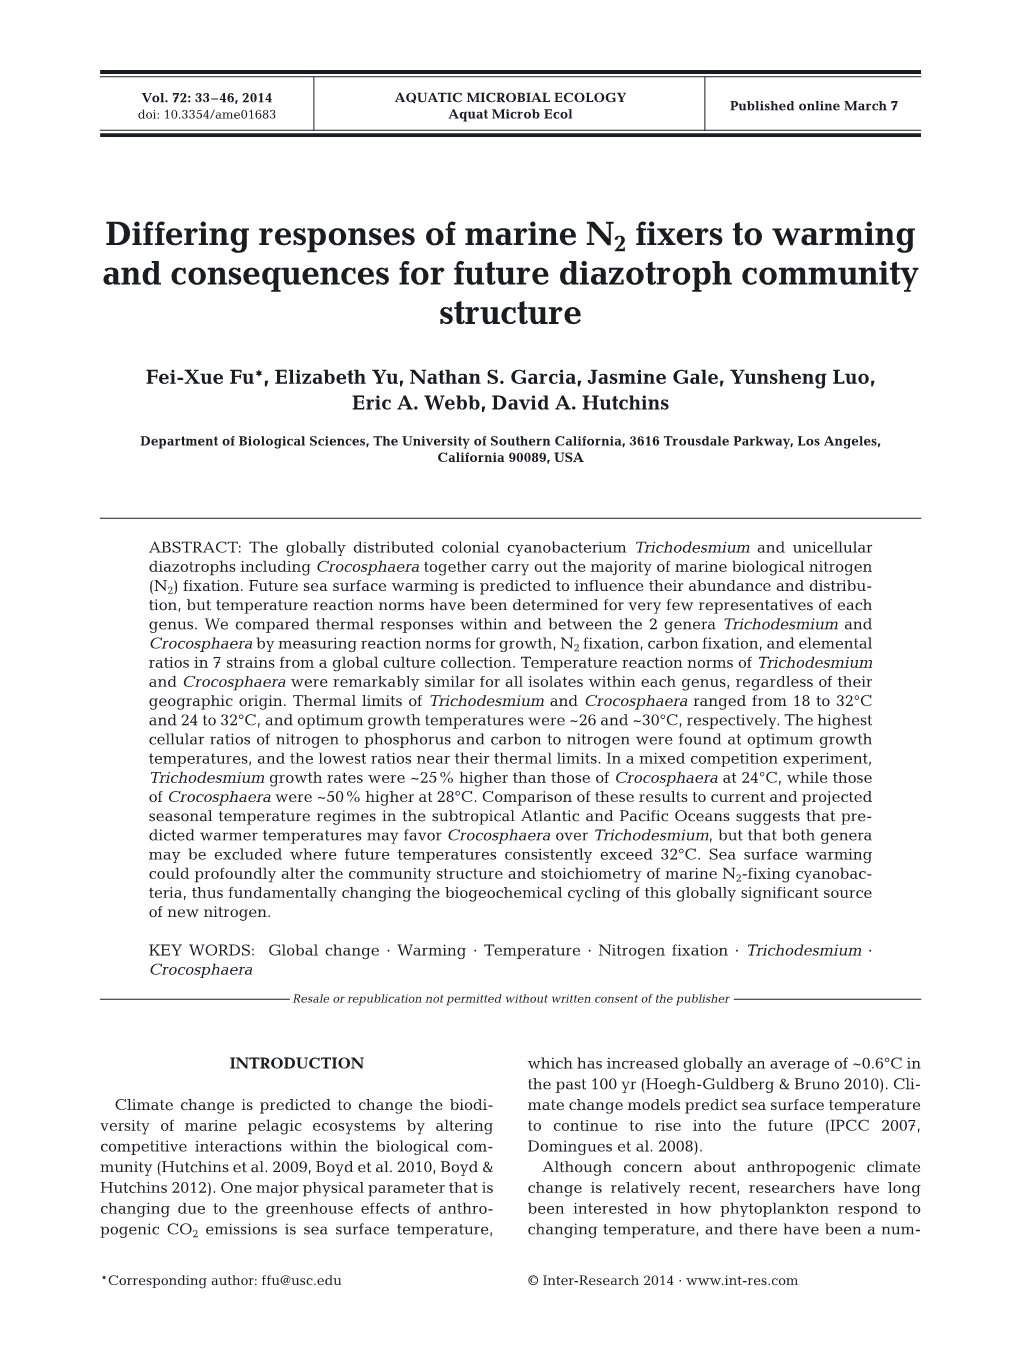 Differing Responses of Marine N2 Fixers to Warming and Consequences for Future Diazotroph Community Structure